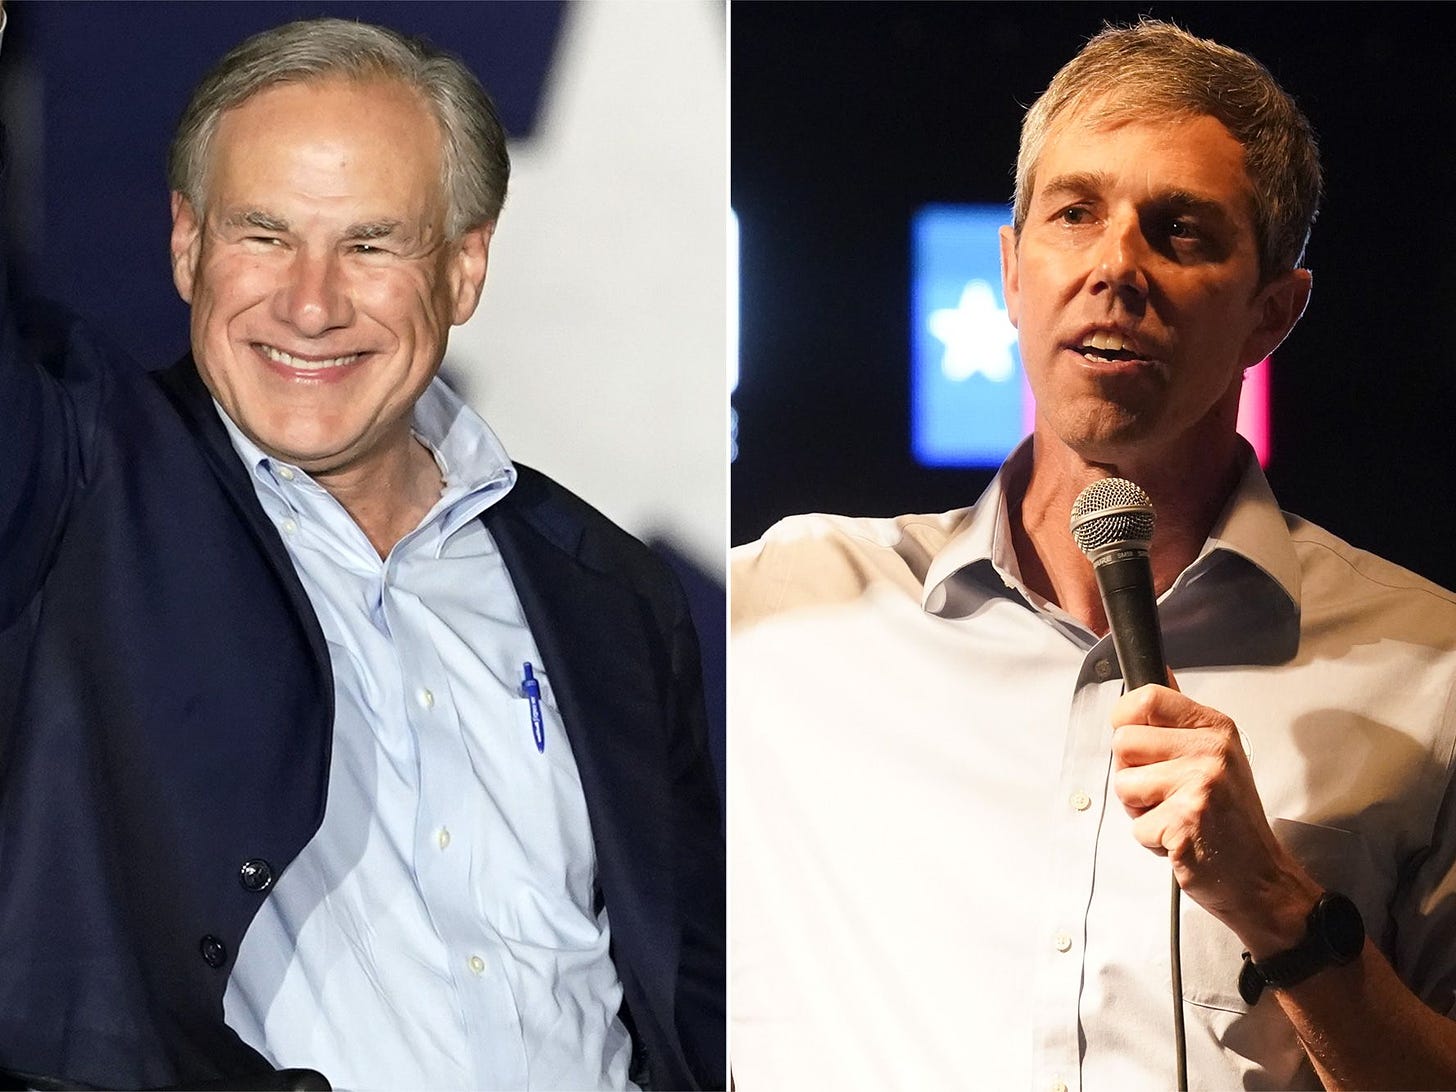 Greg Abbott and Beto O'Rourke Win Primary Races, Setting Up Midterm  Election Battle for Texas Governor